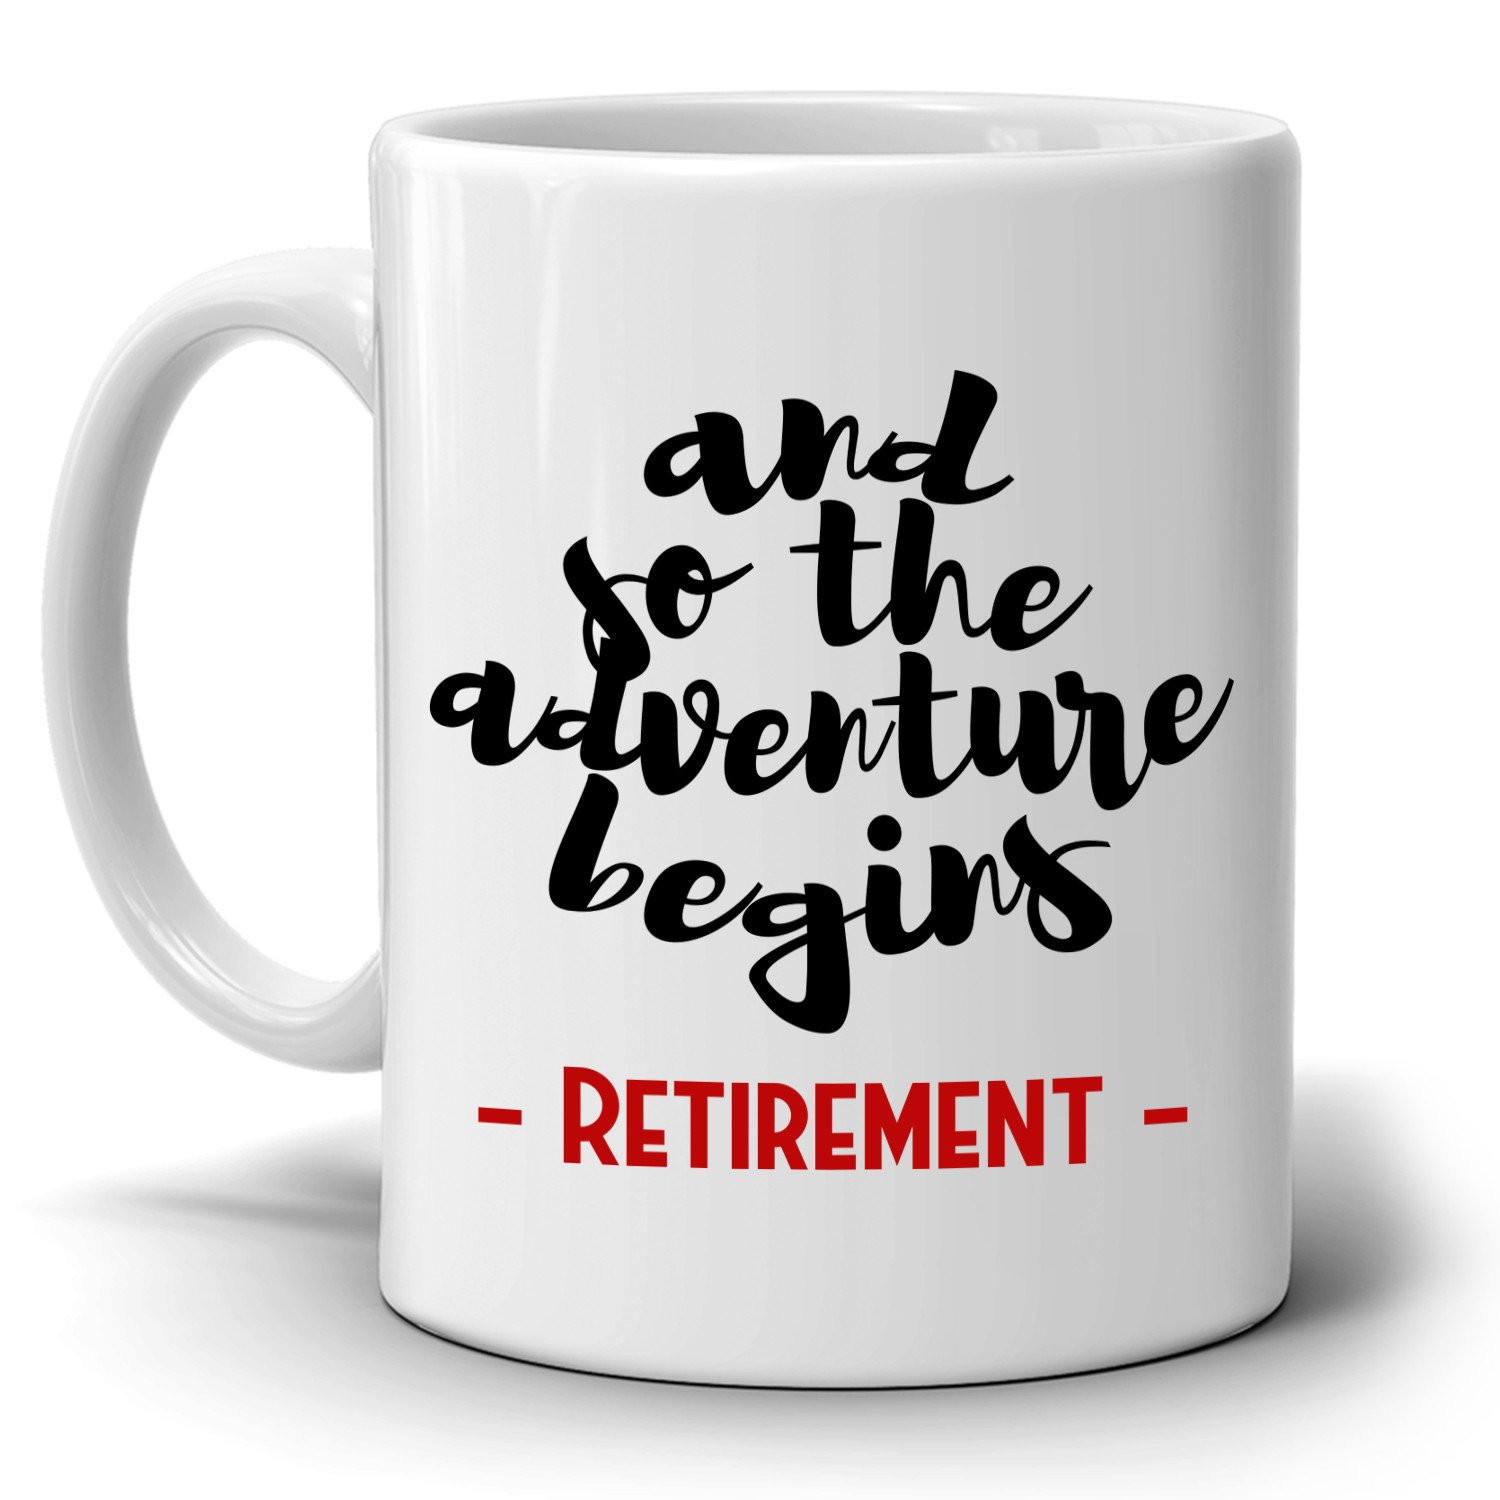 Retirement Gift Ideas For Couples
 Unique Retirement Gifts for Men and Women Perfect Retired